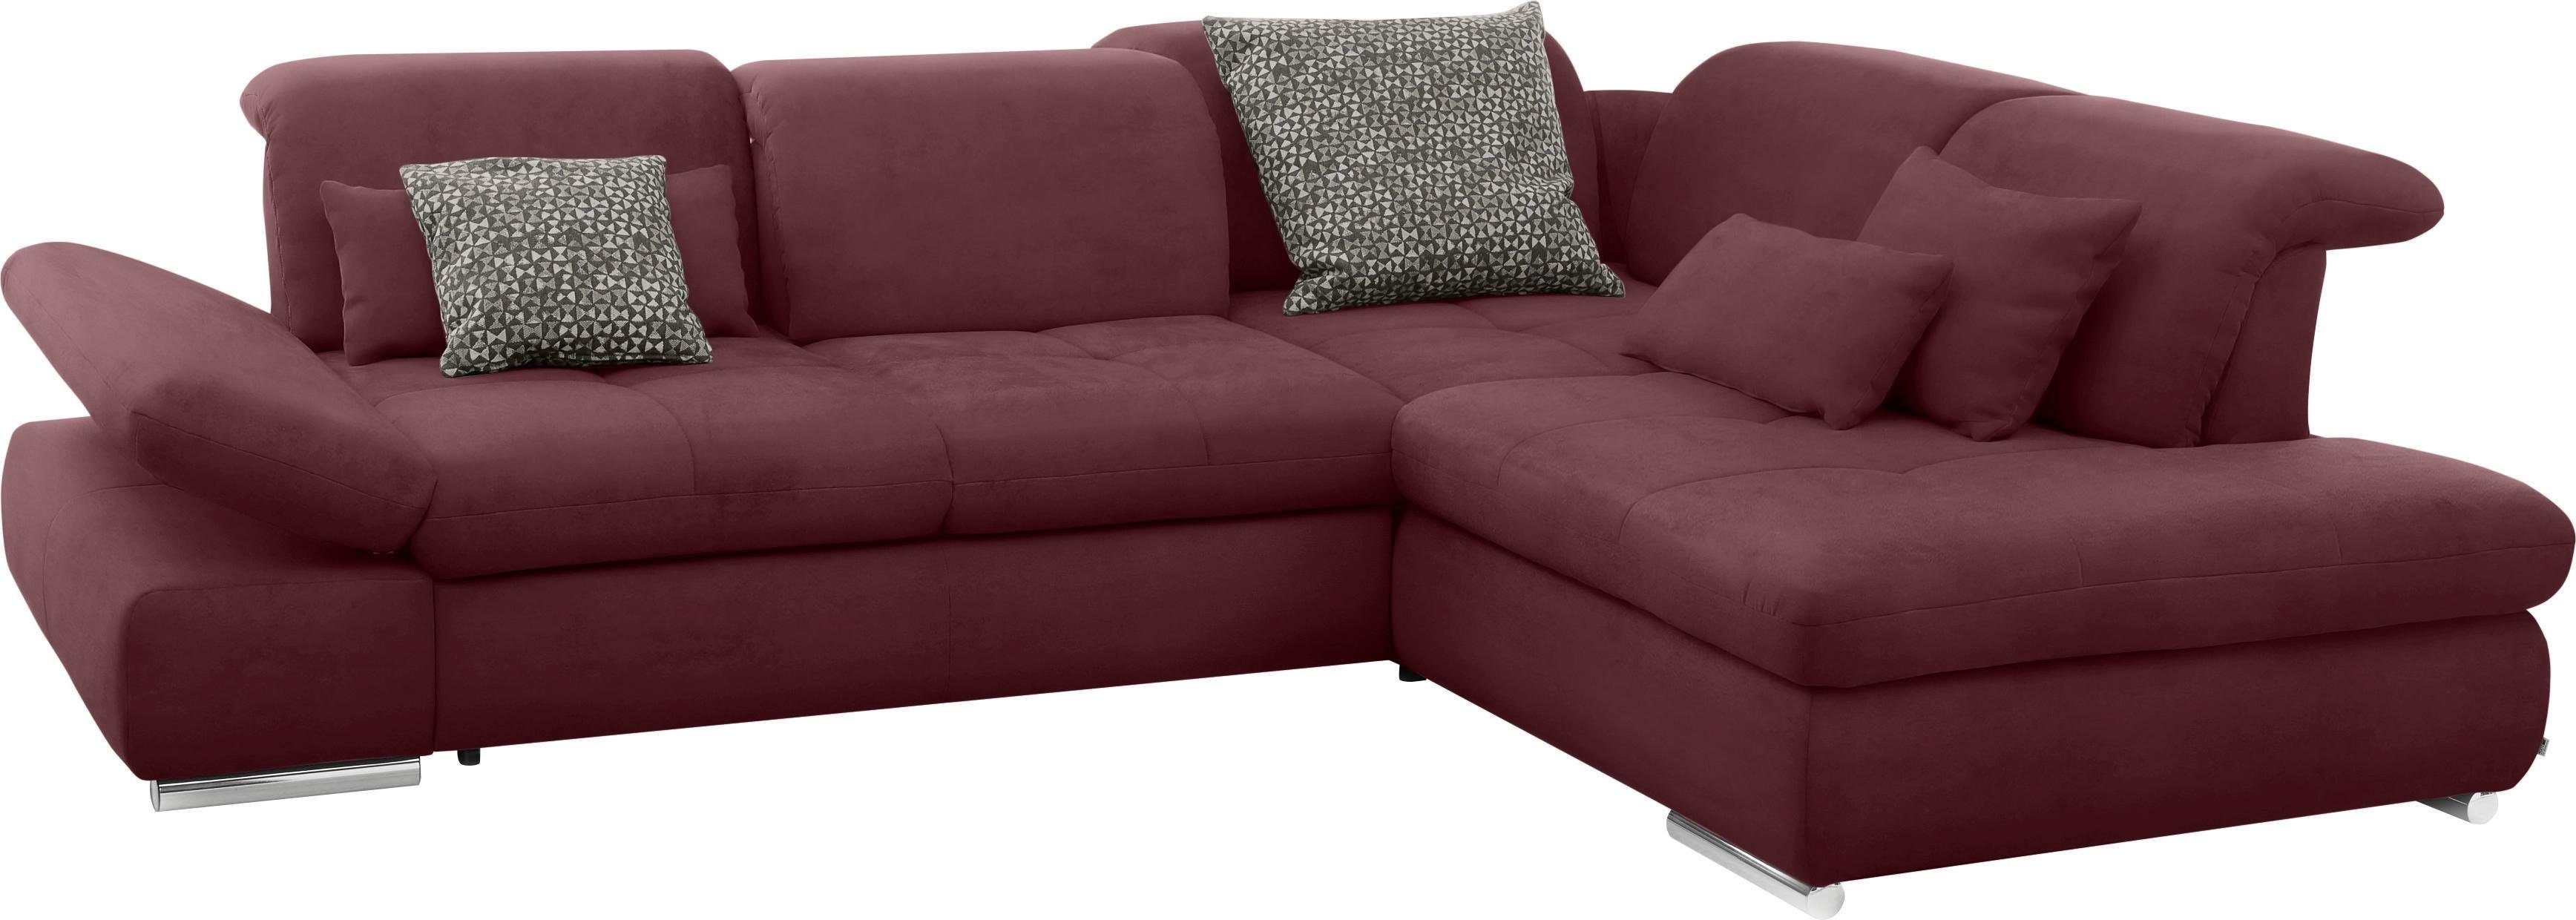 set one by Musterring Ecksofa SO 4100, wahlweise mit Bettfunktion